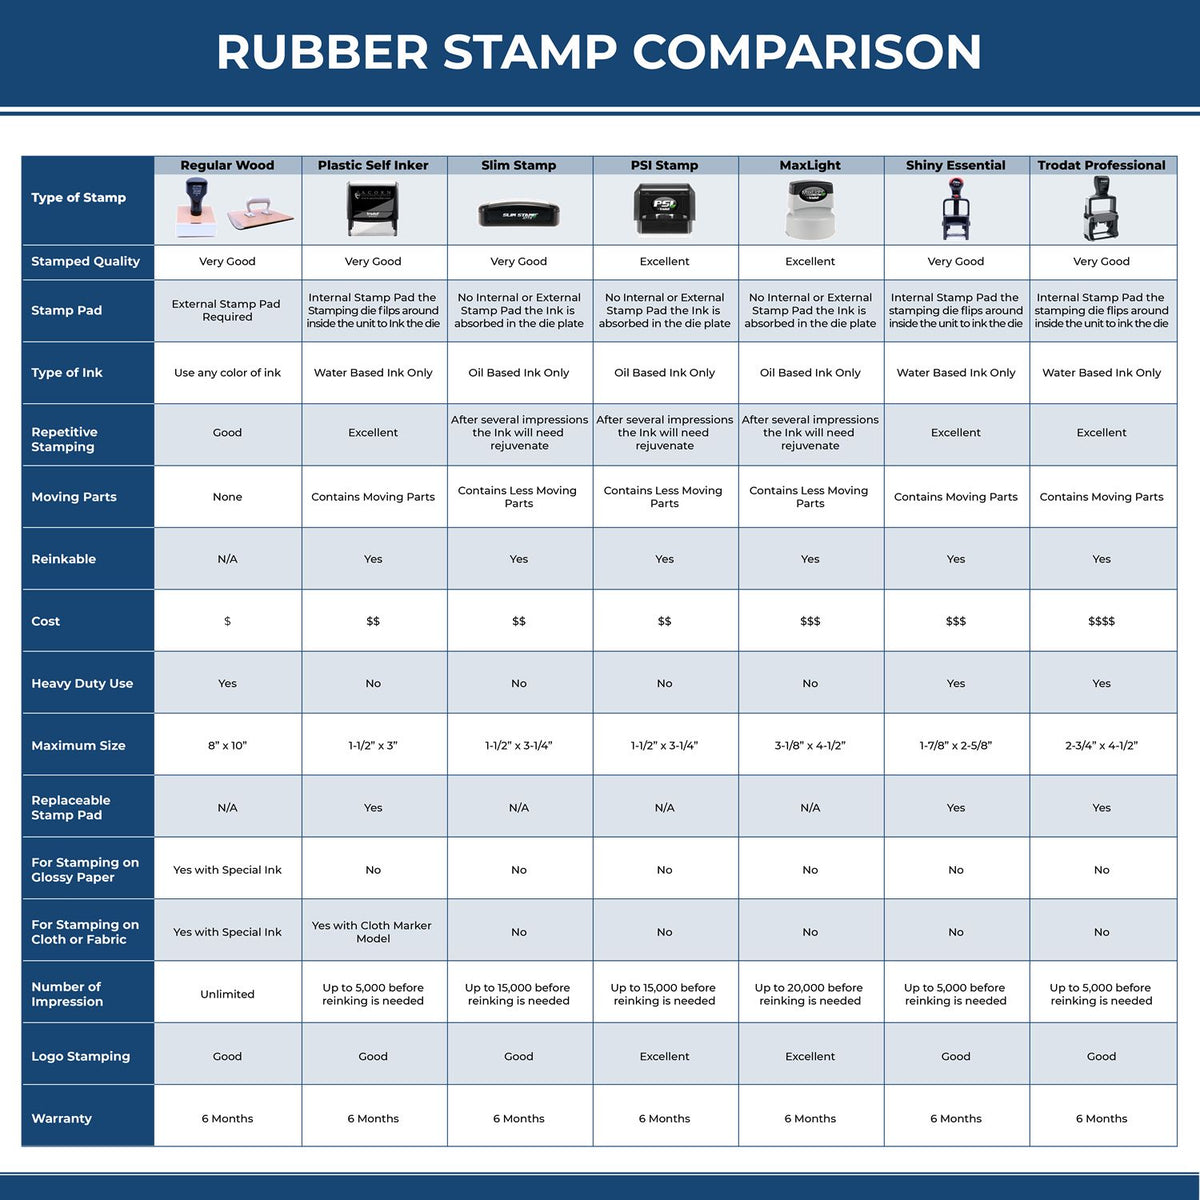 A comparison chart for the different types of mount models available for the Self-Inking Nebraska PE Stamp.